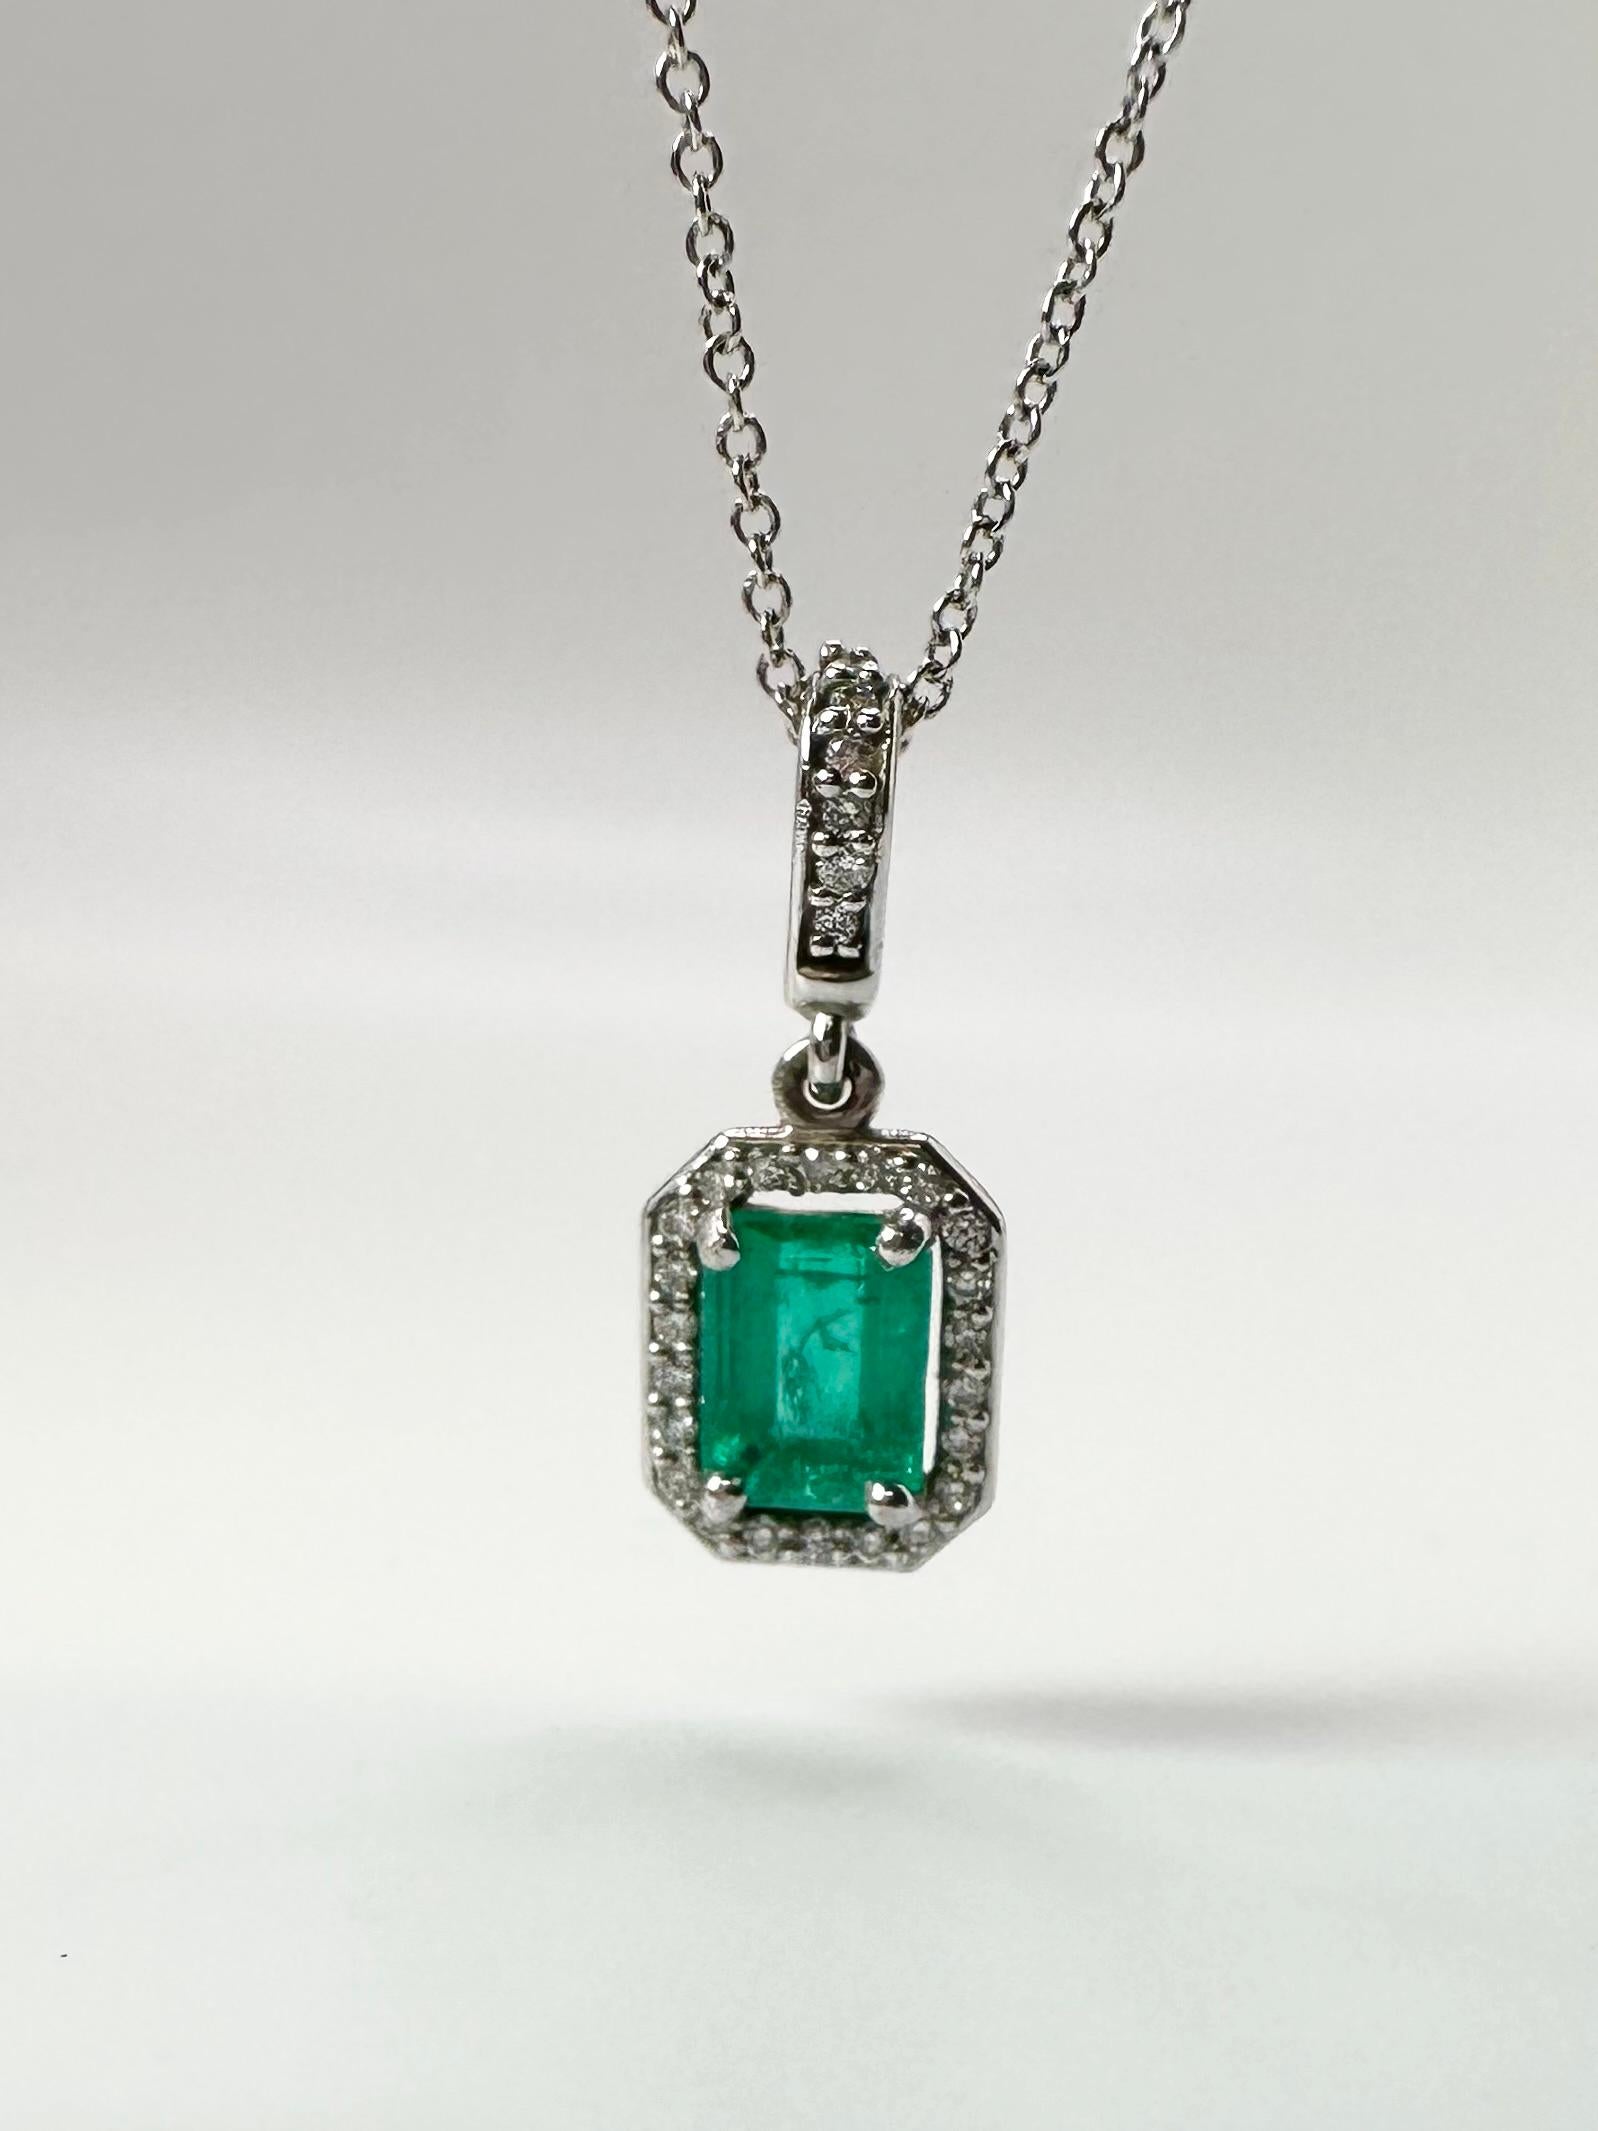 Stunning elegant emerald pendant necklace in 14KT white gold with a gentle halo of diamonds on a 18” chain.


GRAM WEIGHT: 2.33gr
GOLD: 14KT gold
NATURAL EMERALD(S)
Clarity/Color: Slightly Included/Green
Carat:1.20ct
NATURAL DIAMOND
Color/Clarity: